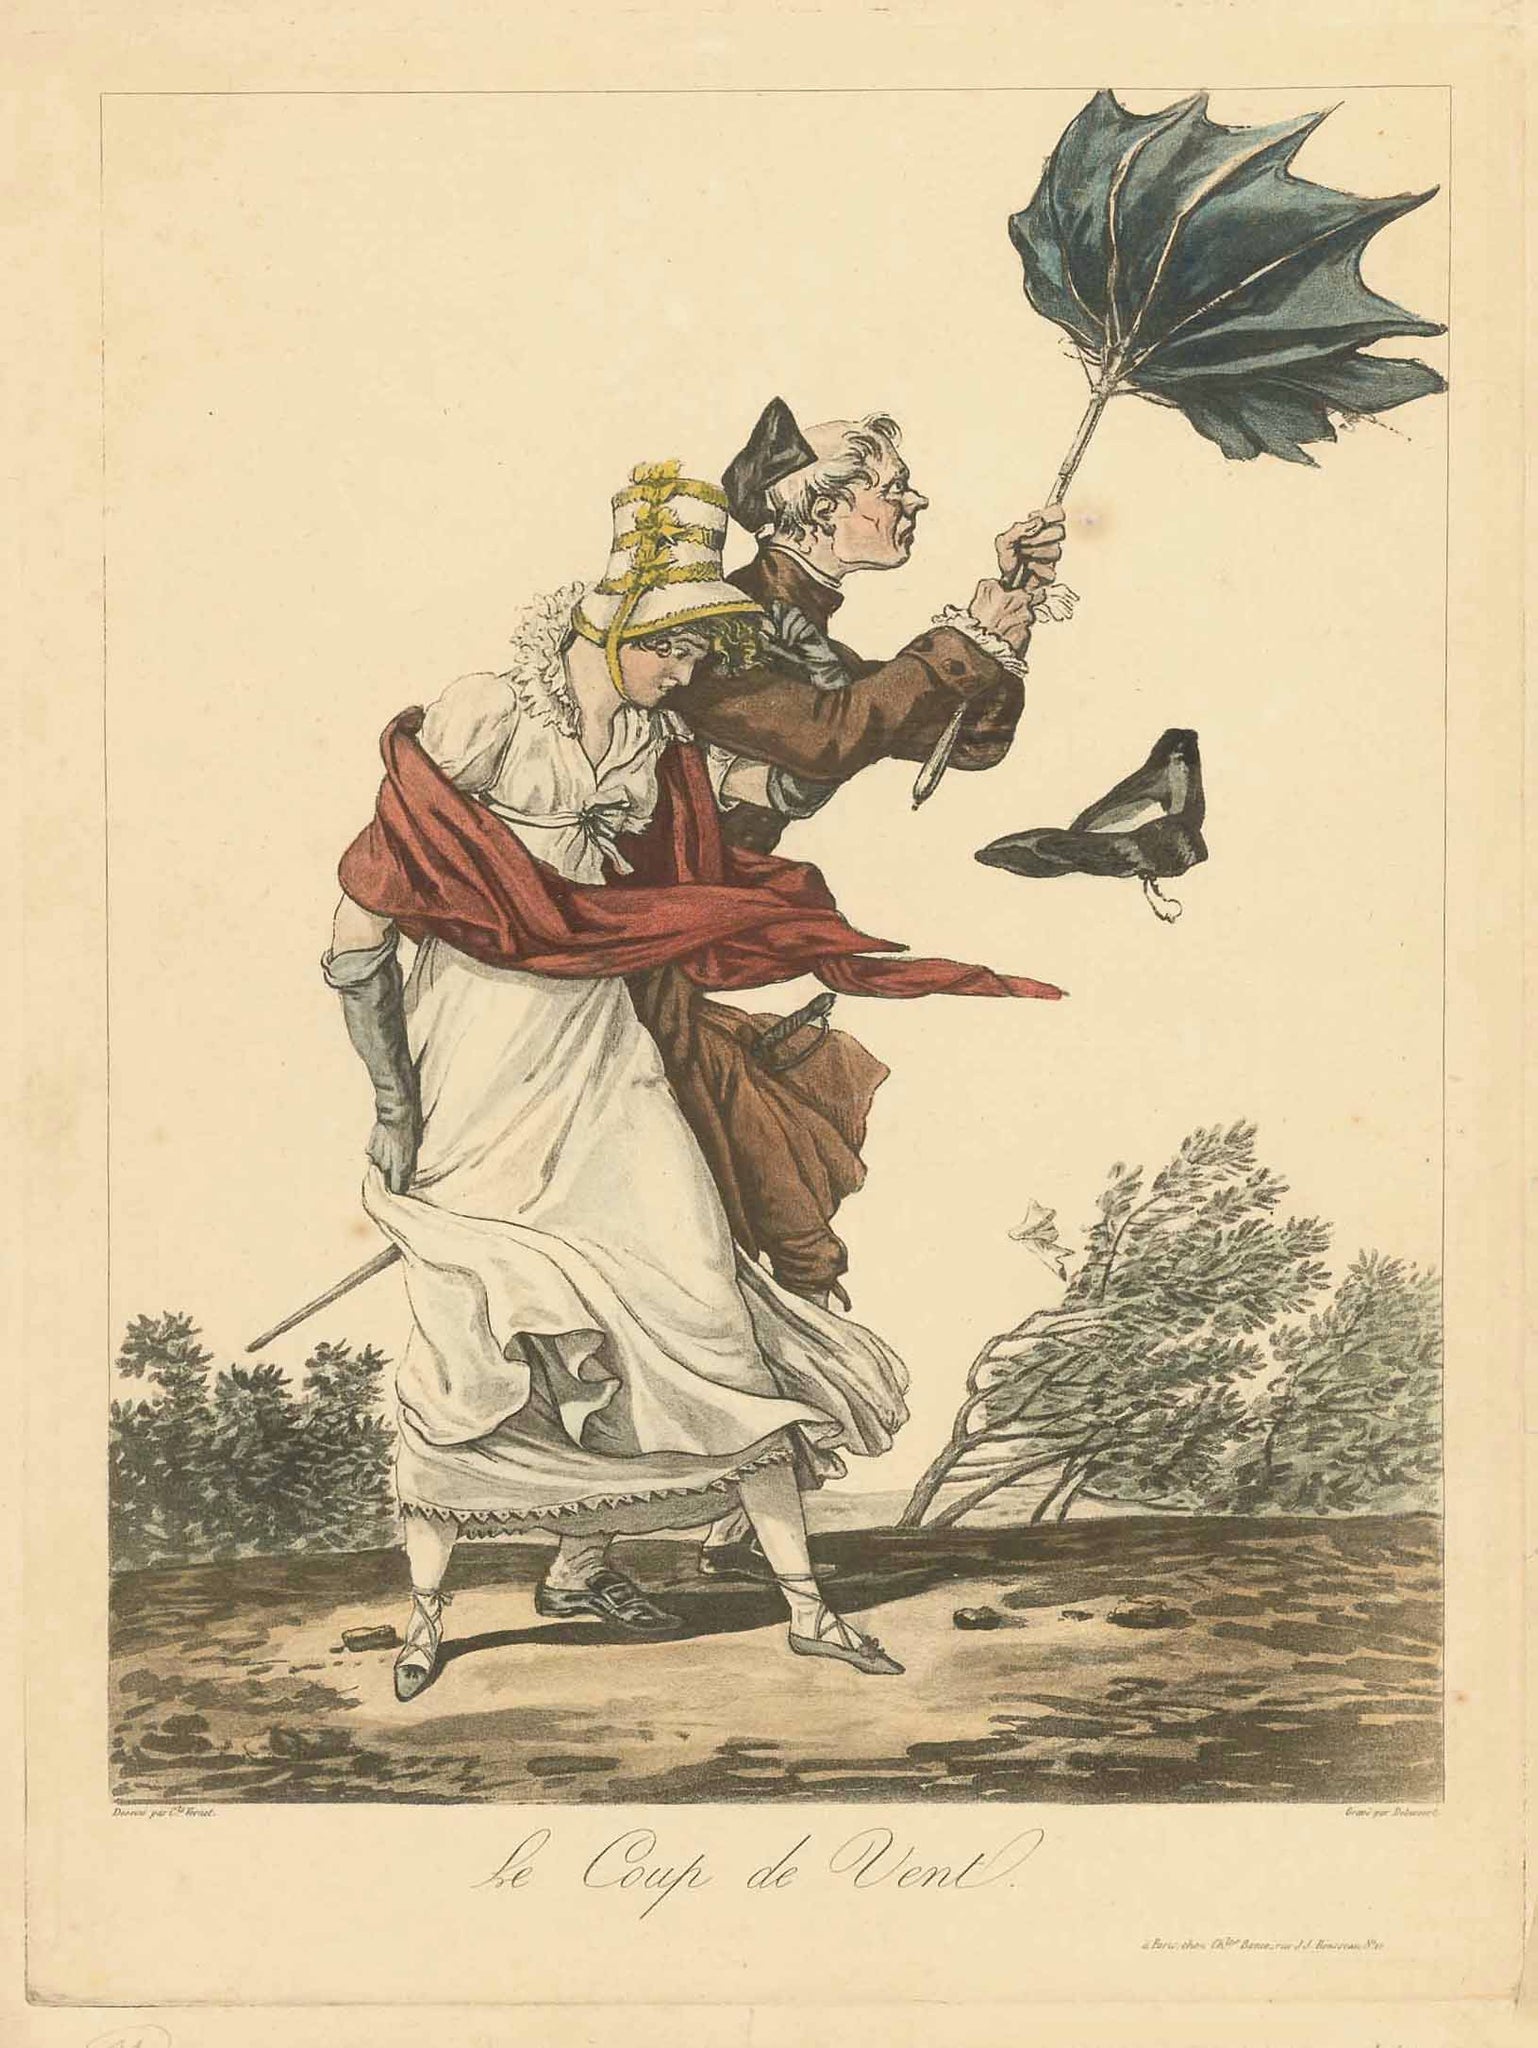 "Le Coup de Vent" (Biedermeier Fashion. UMBRELLA)  A ghastly happening - when a stormy gust hits the promenading couple, turning the protective umbrella inside out, sending the man's hat flying away .  The lady, in Biedermeier attire is hanging onto the arm of her companion and her own hat, which is in danger of falling victim to this tempest.  Aquatint by  Philibert-Louis Debucourt (1755-1832)  After the drawing by Antone Charles Horace Vernet (1758-1836)  Publisher: Charle Bance  Paris, ca. 1840